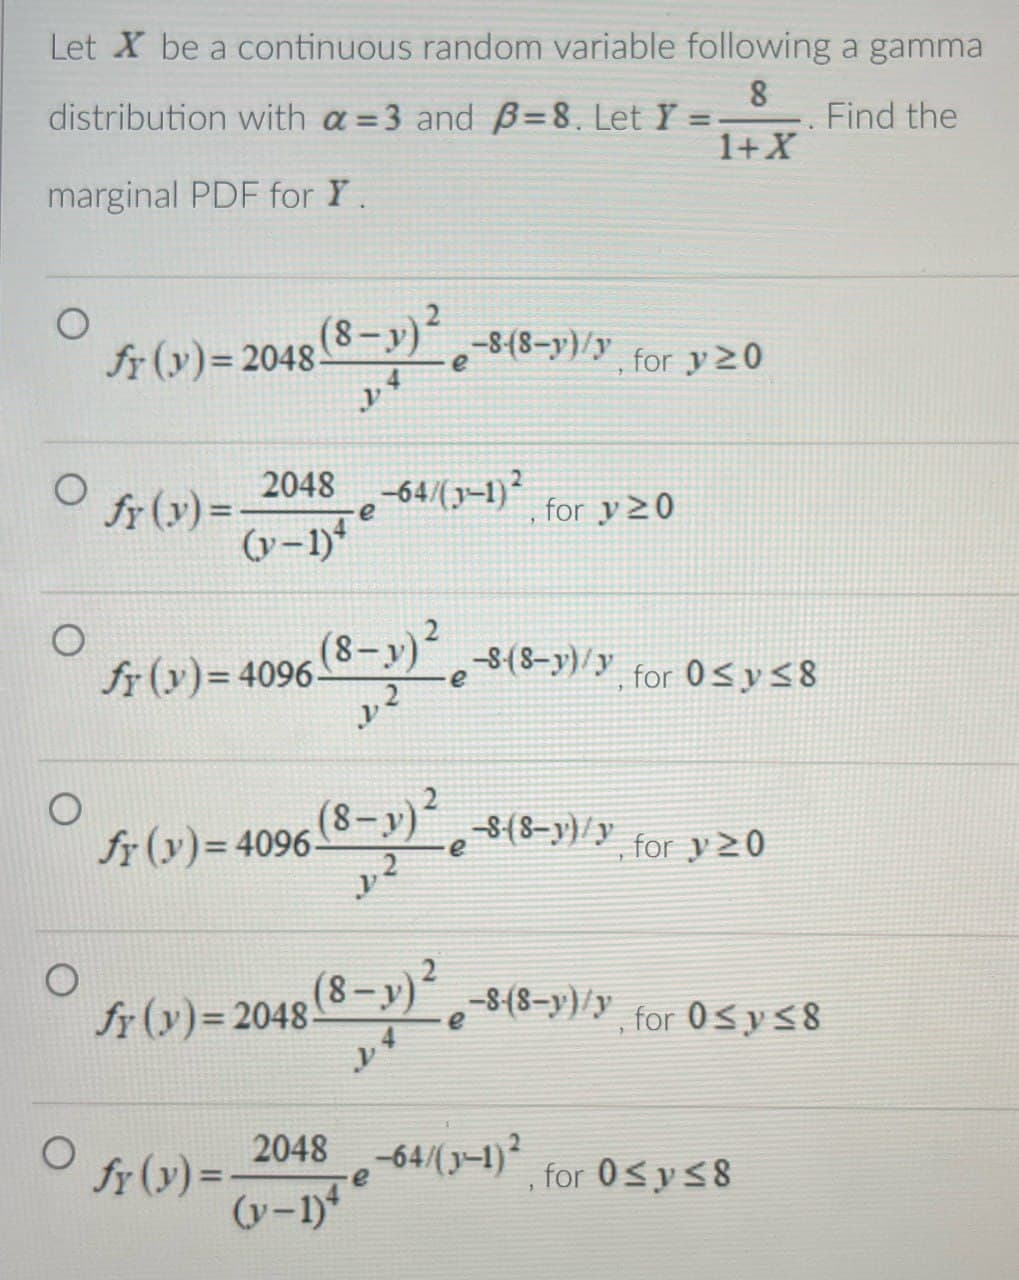 Let X be a continuous random variable following a gamma
distribution with a=3 and B=8. Let Y=
marginal PDF for Y.
=
8
1+X
Find the
O
fr (y) = 2048 (8-)² -8-(8-y)/y for y20
(y)=2048.
y4
e
fr (y)=4096-
о
fr (y)=
2048-64/(1-1)2
for y≥0
(y-1)
e
(8-1)² -8(8-1)/y, for 0≤ y ≤8
y2
O
fr (y) = 4096 (8-1)²
y2
e
(8-y)² -s-(8-y)/y for y≥0
O
fr (y)=2048.
(8-y)²
e
-8-(8-y)/y, for 0≤ y ≤8
y
fr (y)=.
2048-64/(3-1)2
e
, for 0≤y≤8
(y-1)